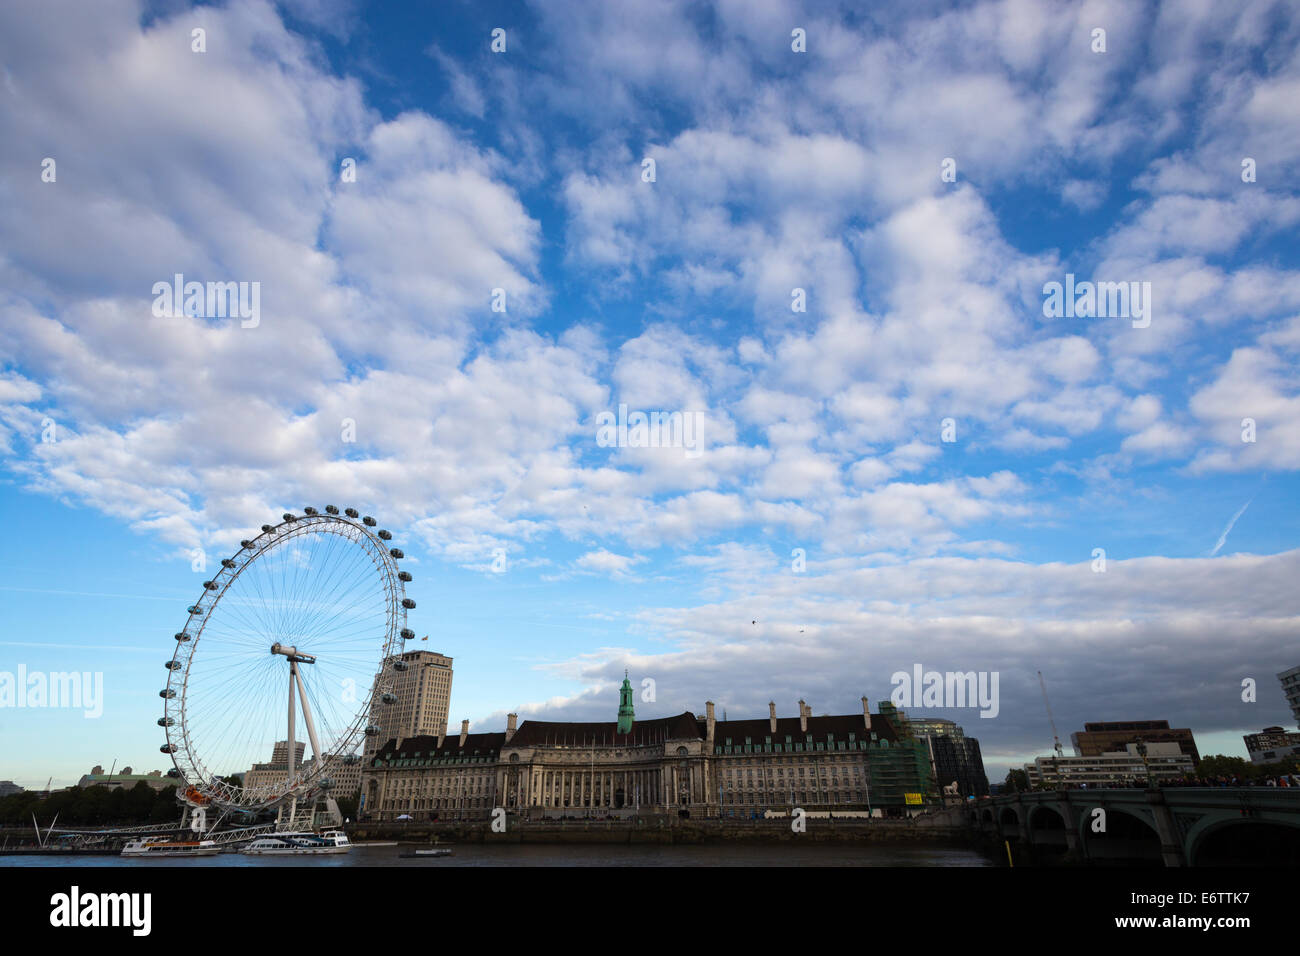 london-eye-on-south-bank-of-the-river-th